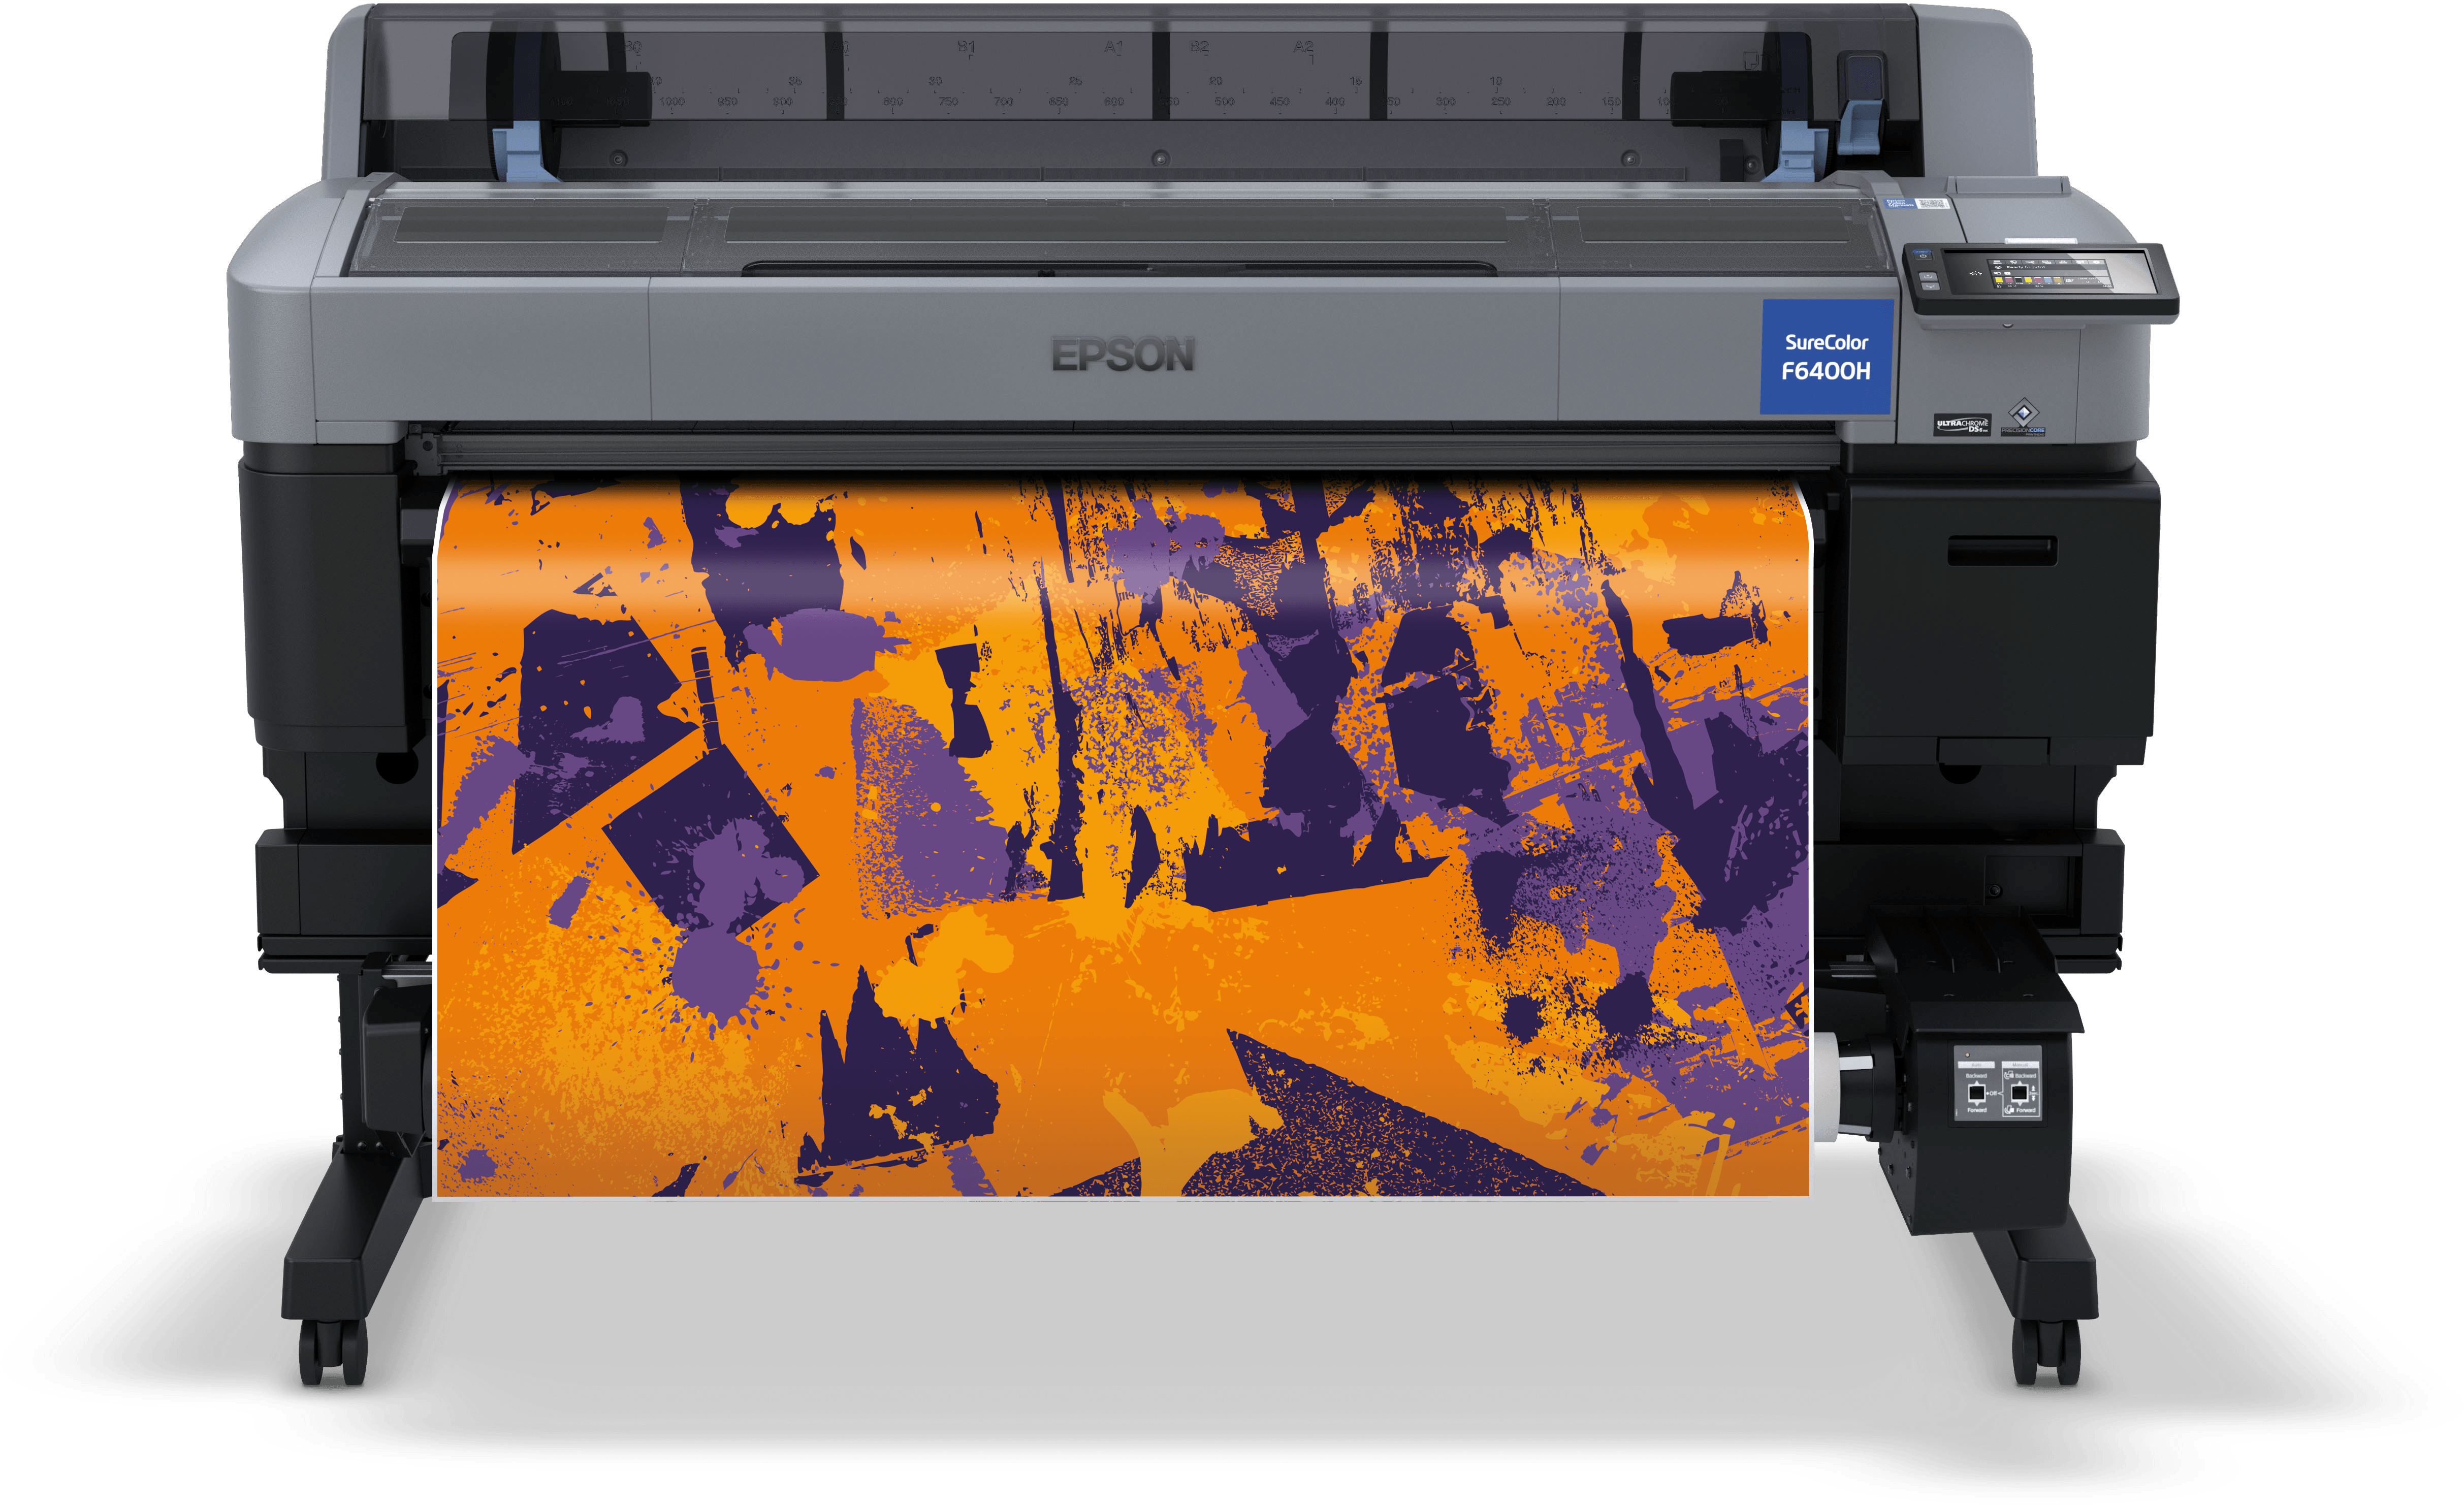 SureColor SC-F6400H | LFP | Printers | Products | Epson Europe